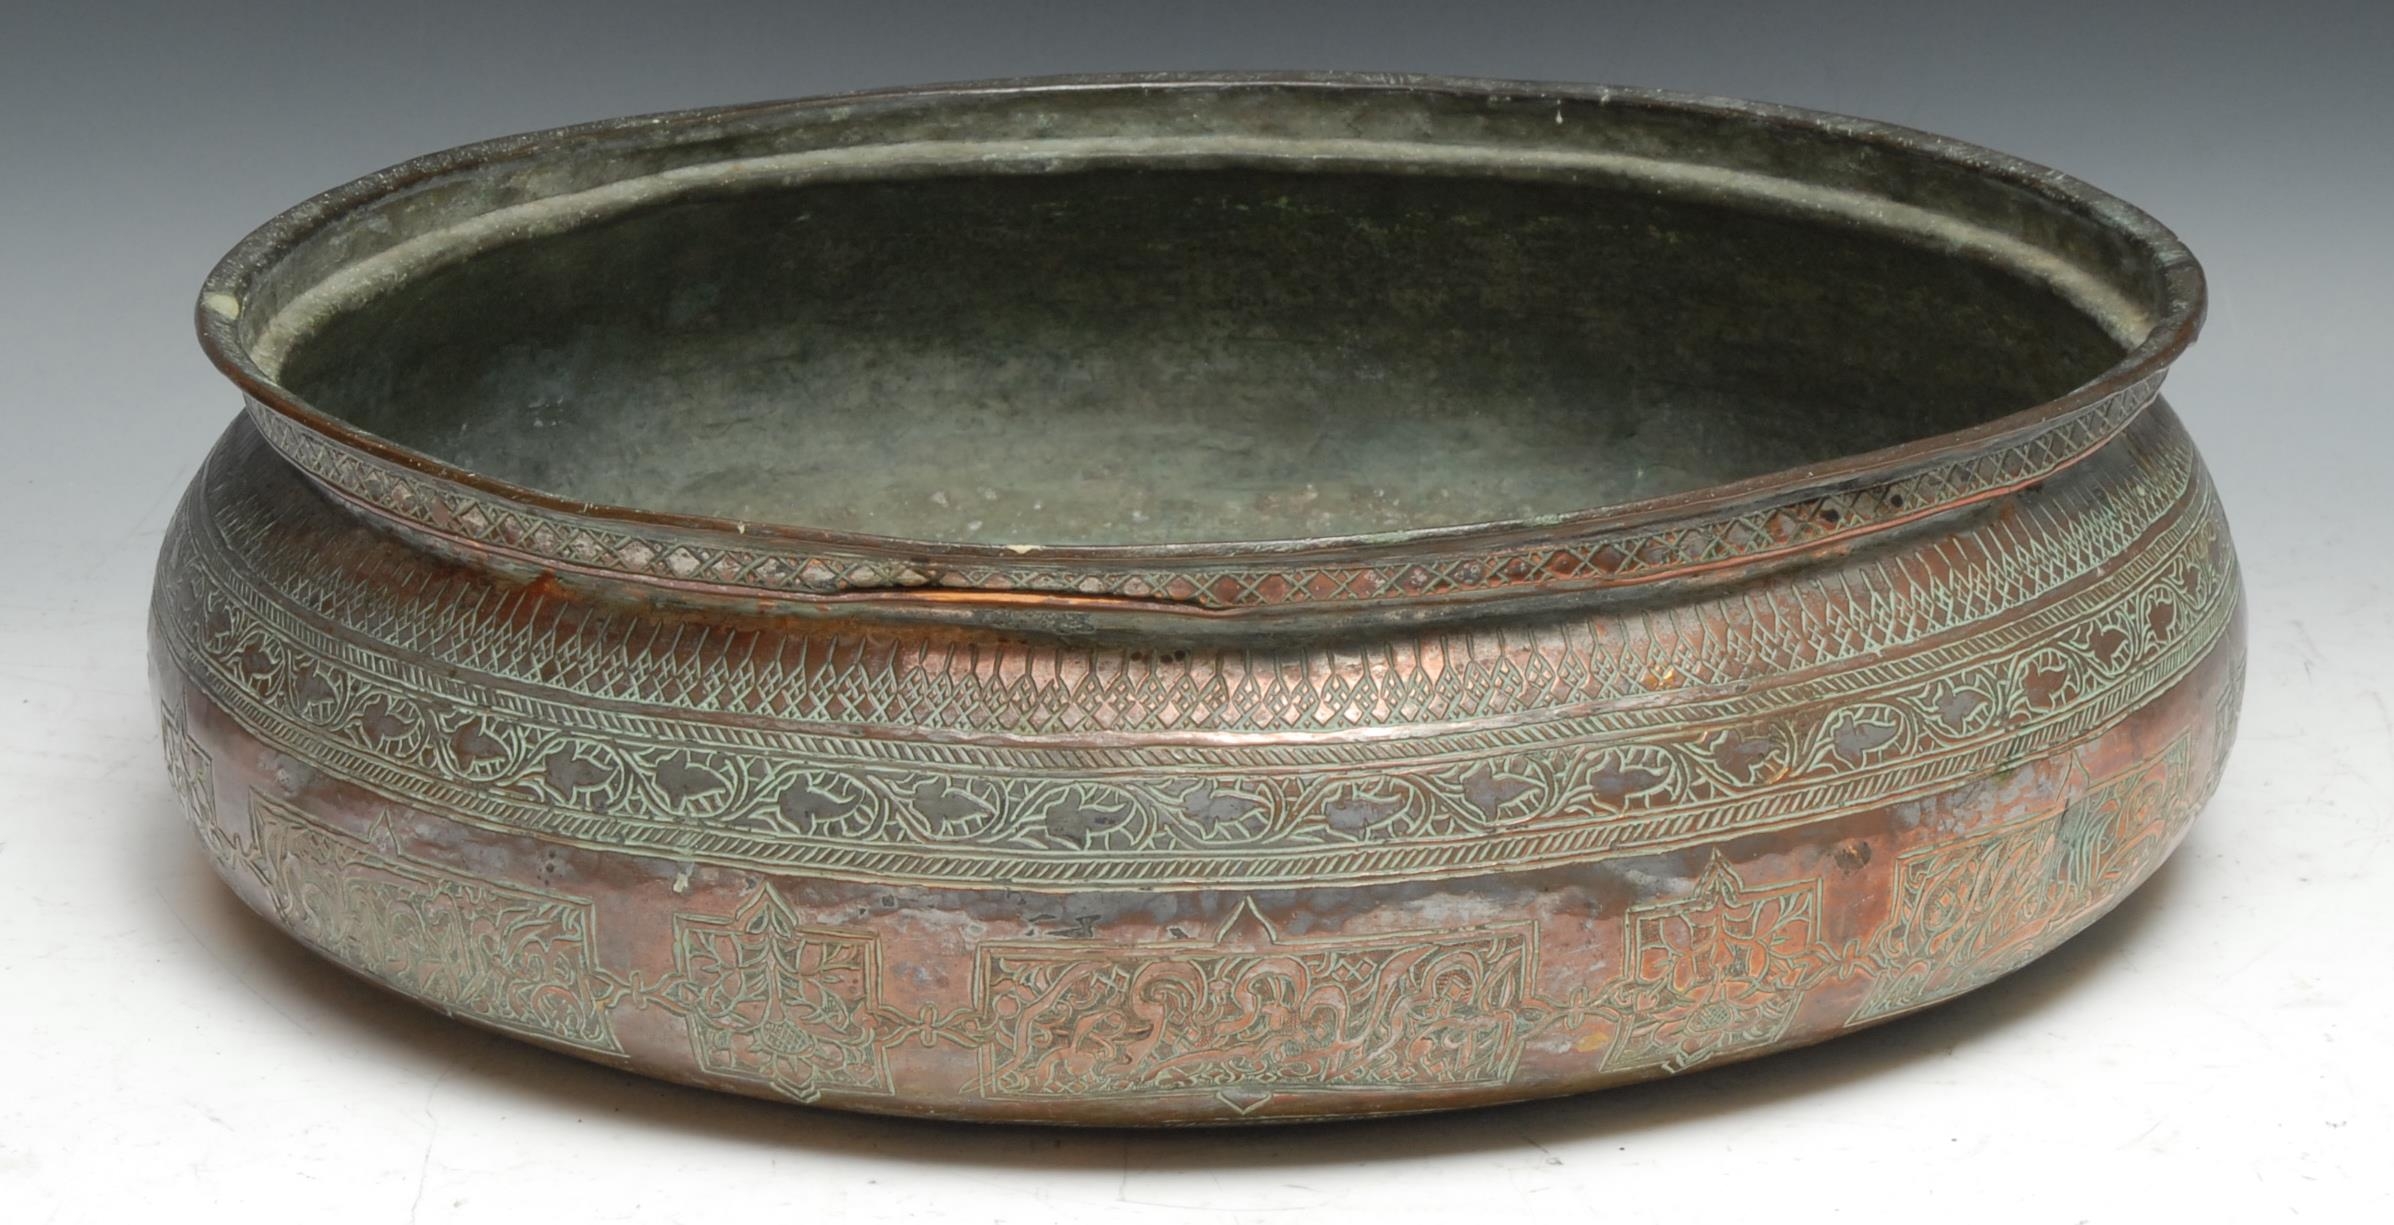 A large Middle Eastern copper bowl chased in the Islamic taste with Arabic calligraphy, scrolling